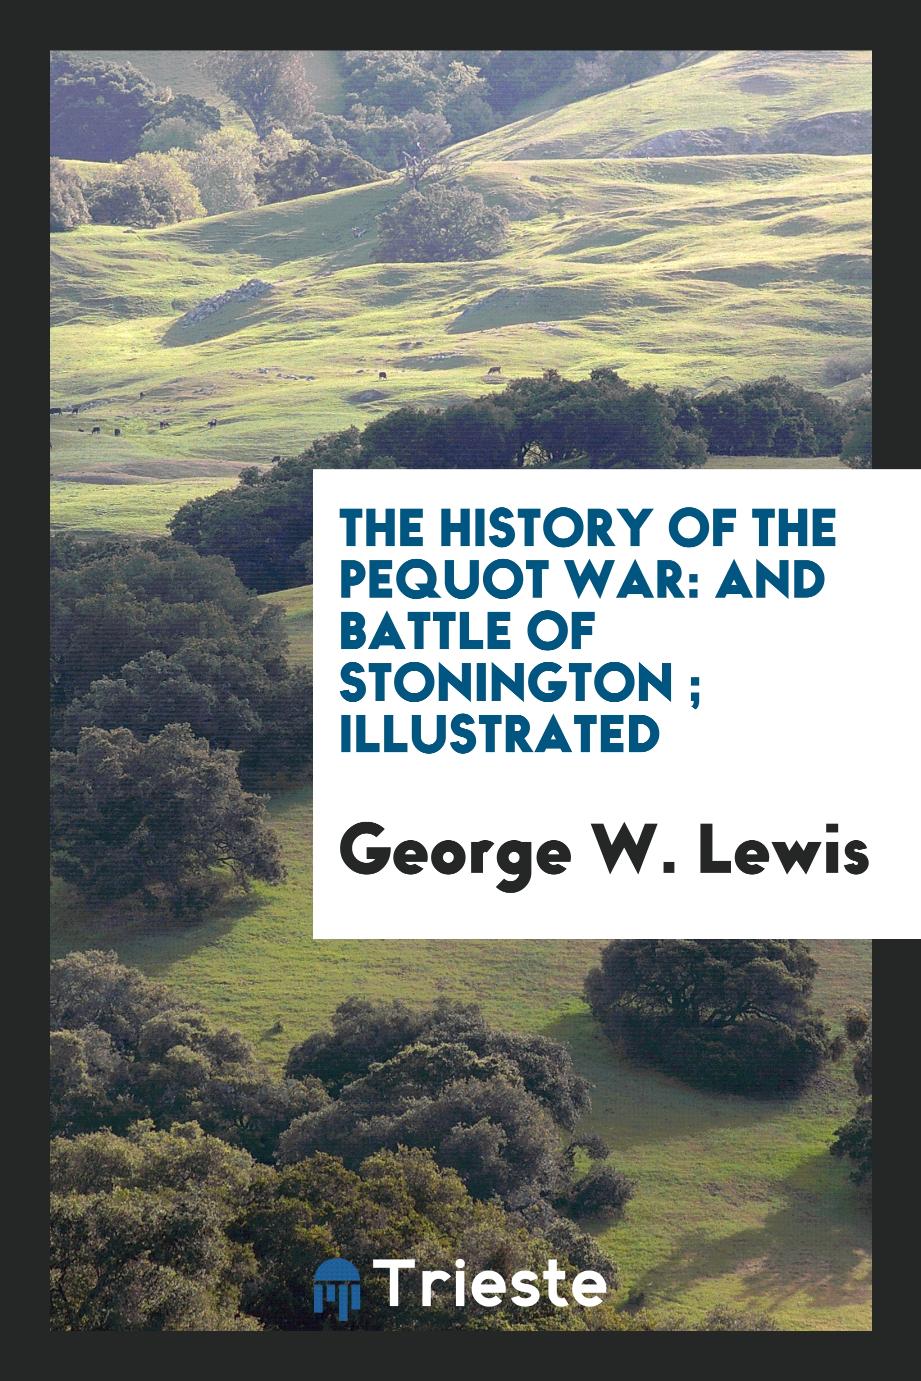 The History of the Pequot War: And Battle of Stonington ; Illustrated